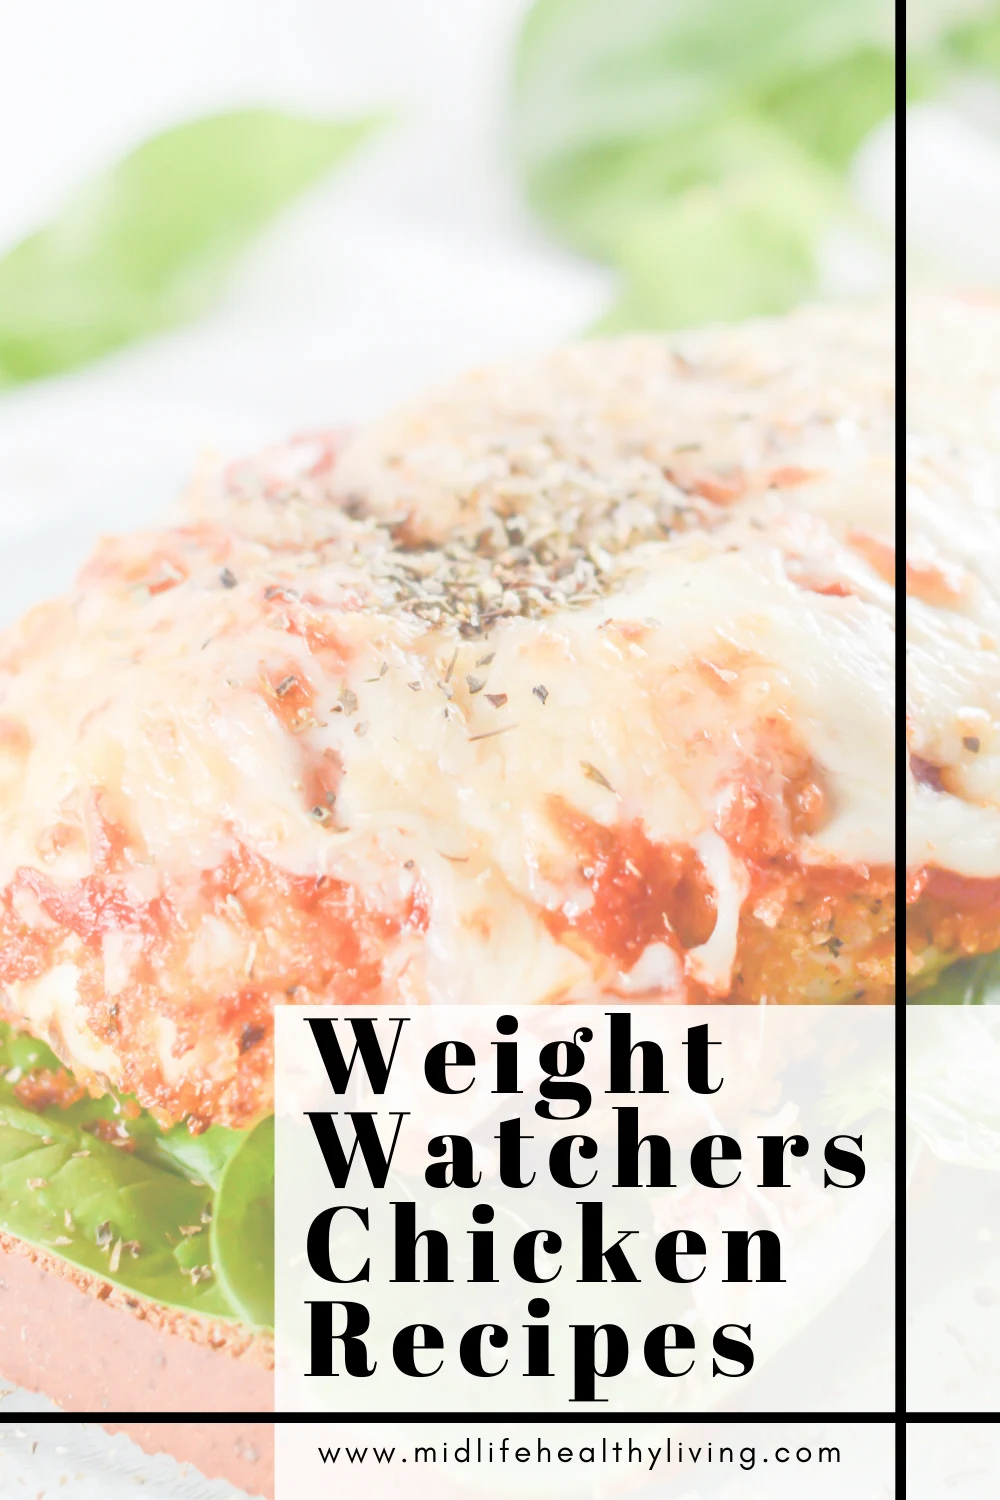 Weight Watchers Chicken Recipes Midlife Healthy Living